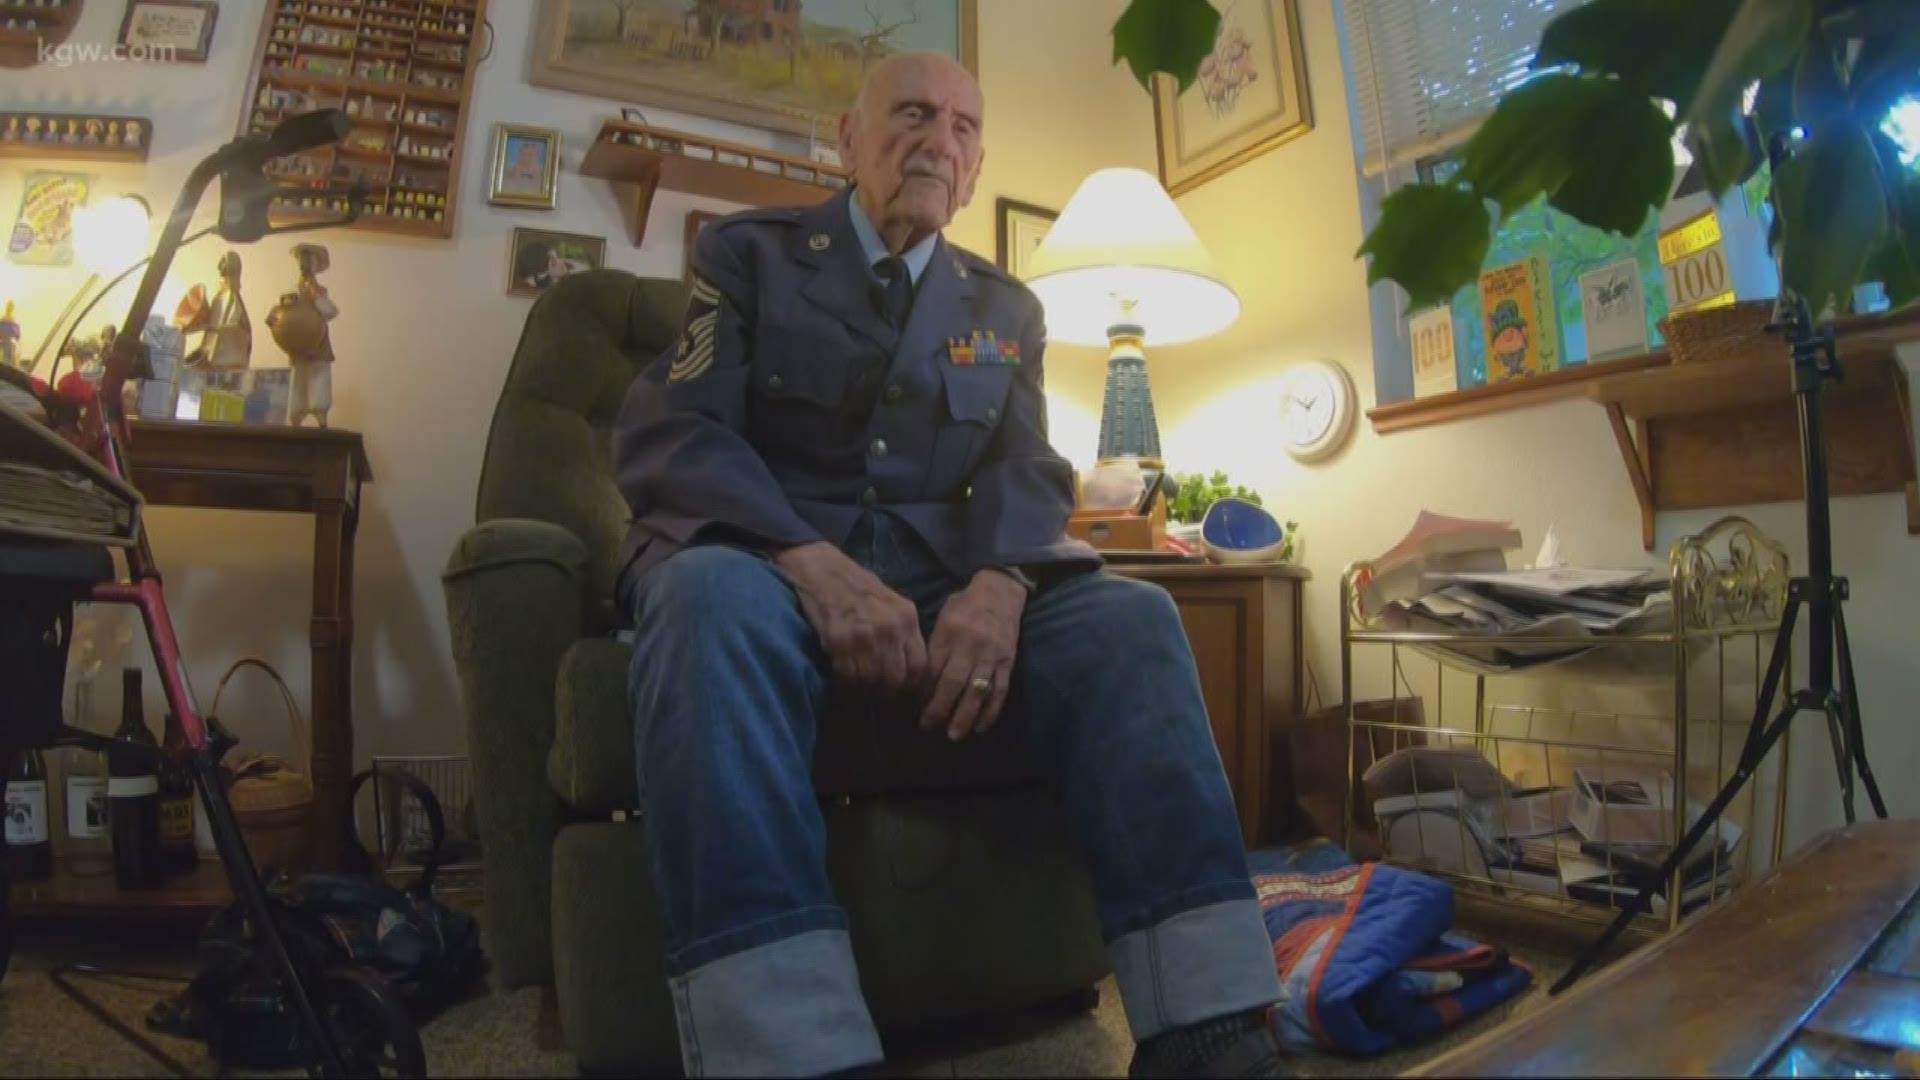 Those Who Serve: Meet a 100-year-old veteran